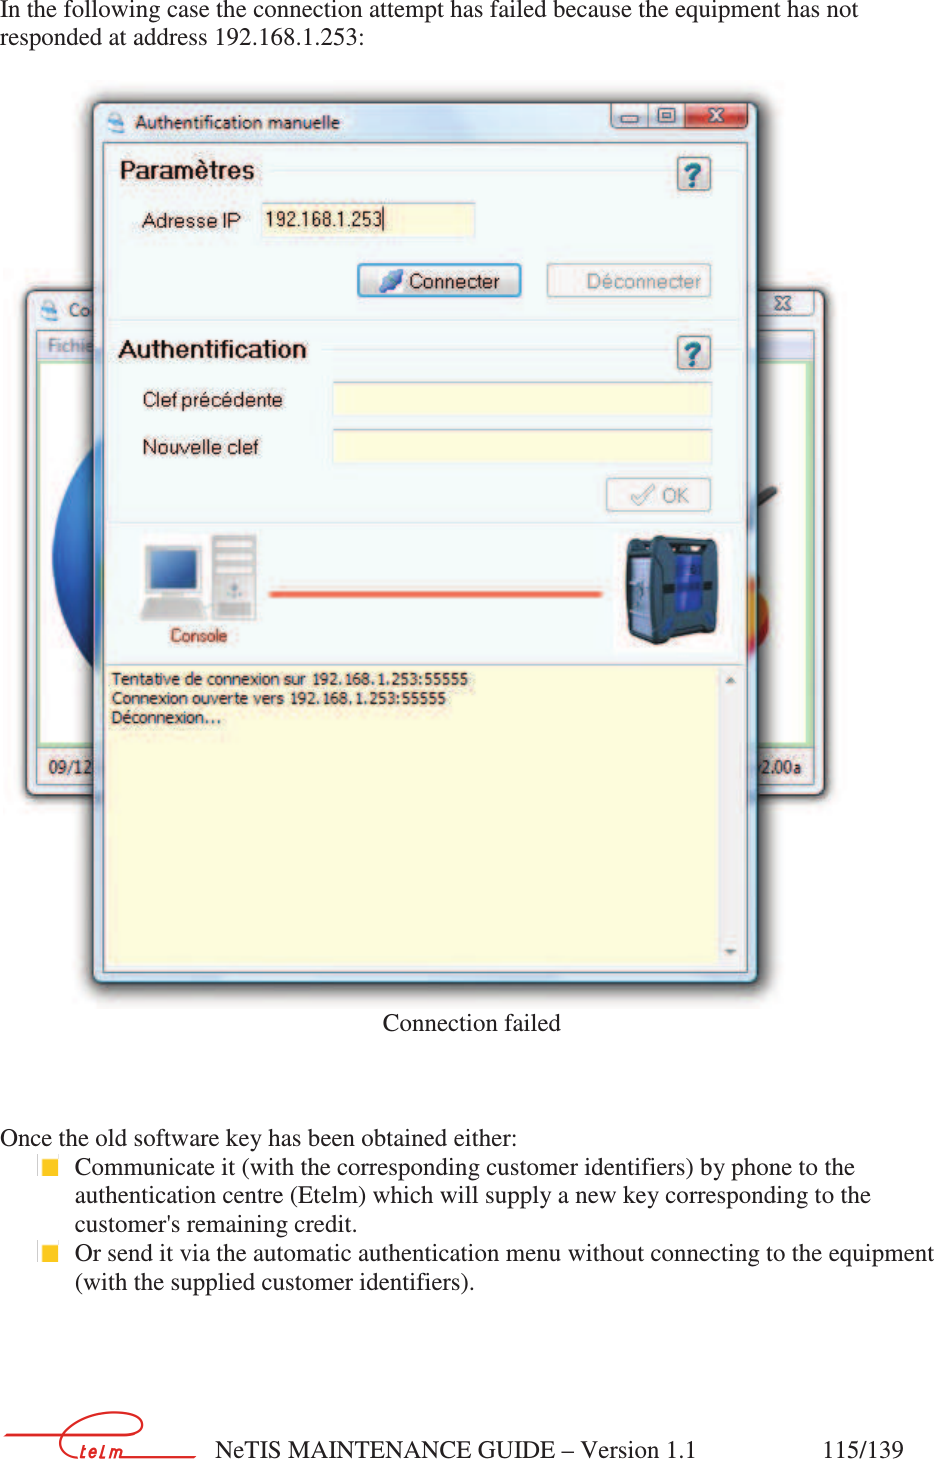        NeTIS MAINTENANCE GUIDE – Version 1.1                    115/139   In the following case the connection attempt has failed because the equipment has not responded at address 192.168.1.253:   Connection failed    Once the old software key has been obtained either:  Communicate it (with the corresponding customer identifiers) by phone to the authentication centre (Etelm) which will supply a new key corresponding to the customer&apos;s remaining credit.  Or send it via the automatic authentication menu without connecting to the equipment (with the supplied customer identifiers).    